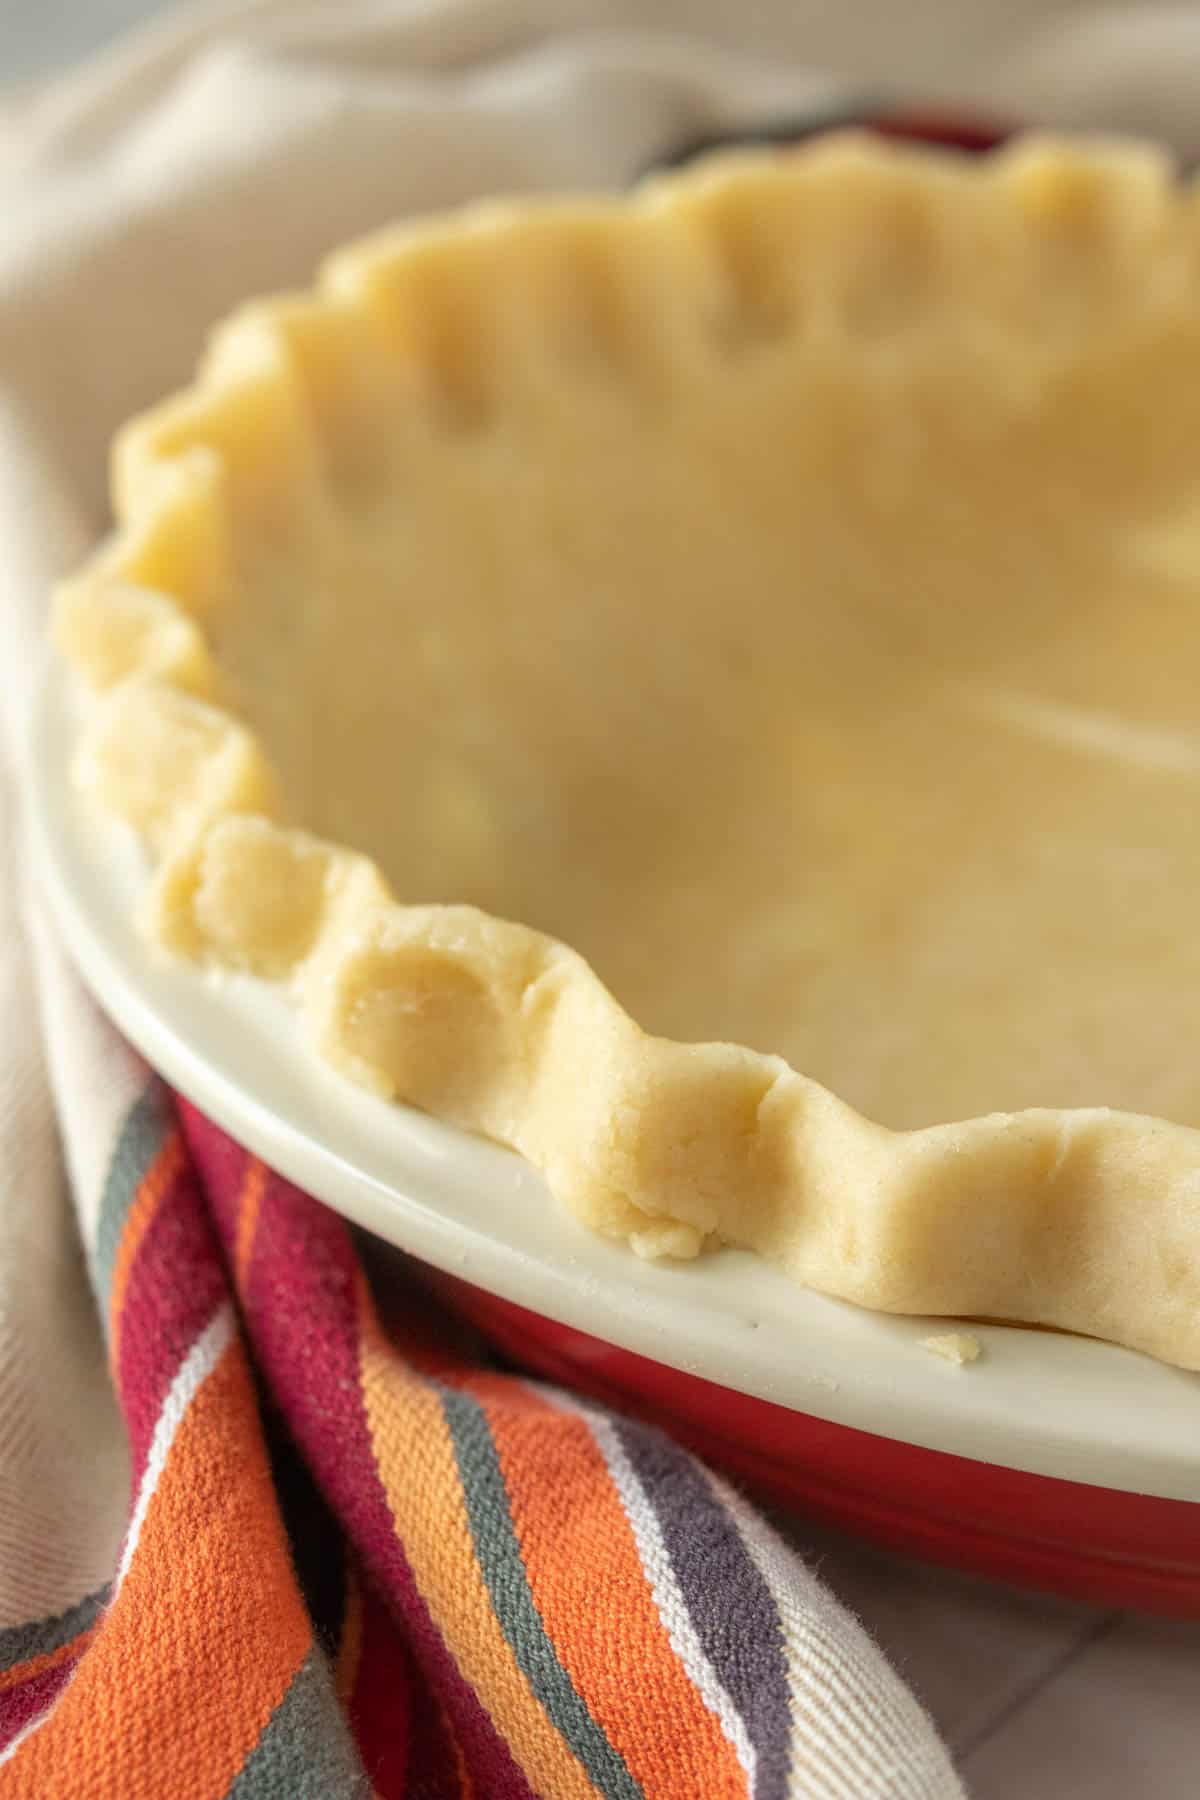 A pie crust in a red and white dish.